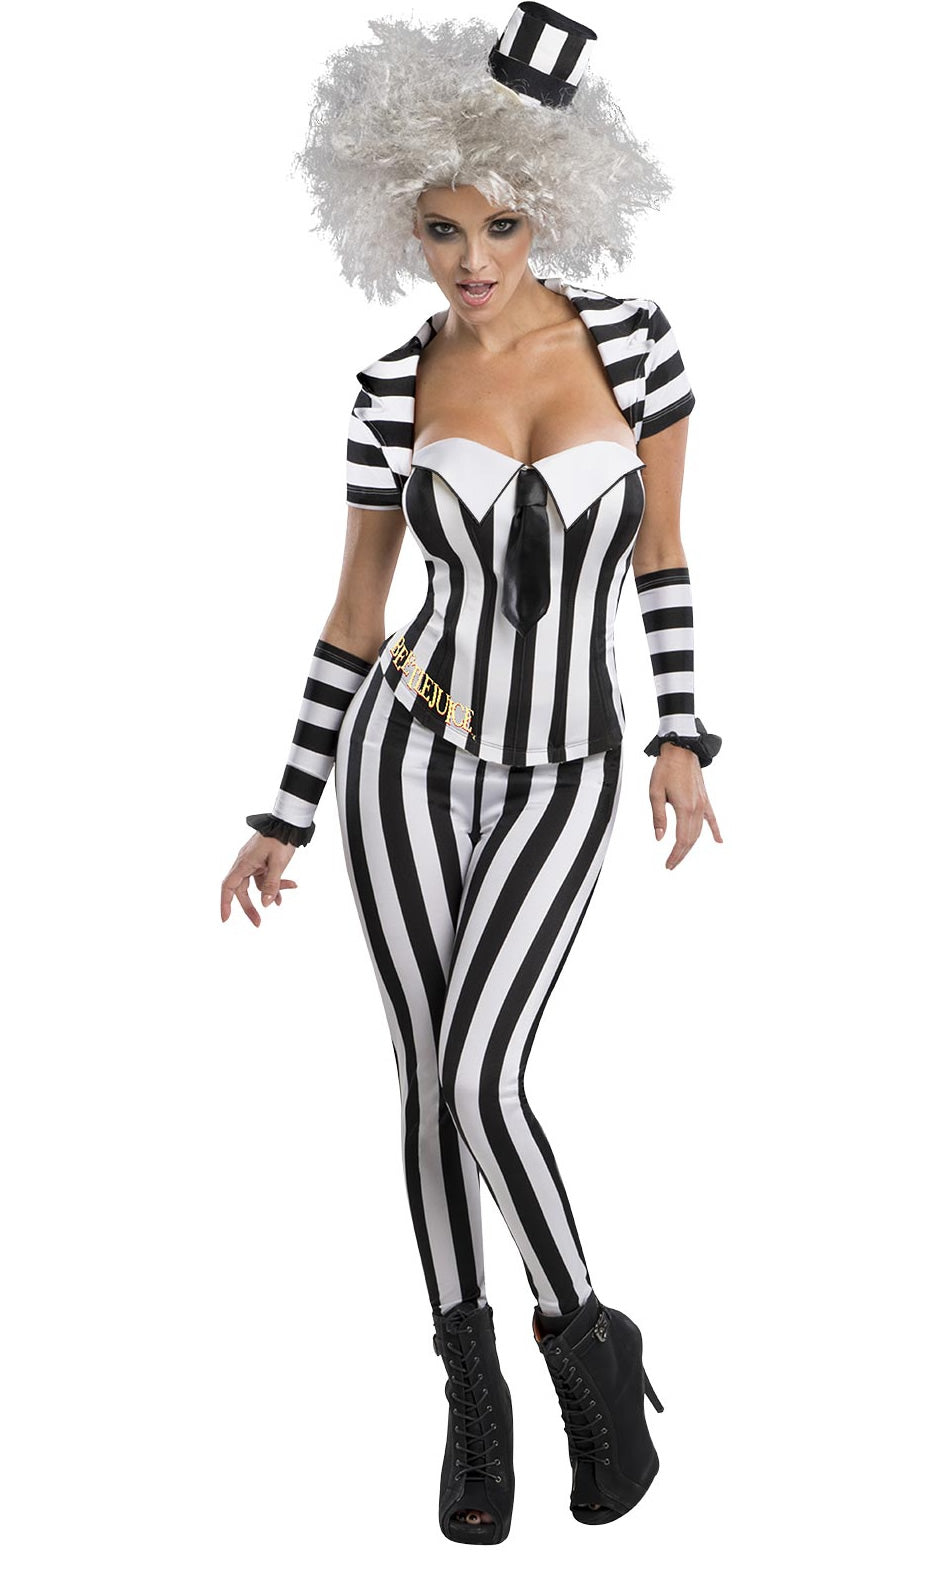 Woman's Beetlejuice costume with hat and gloves